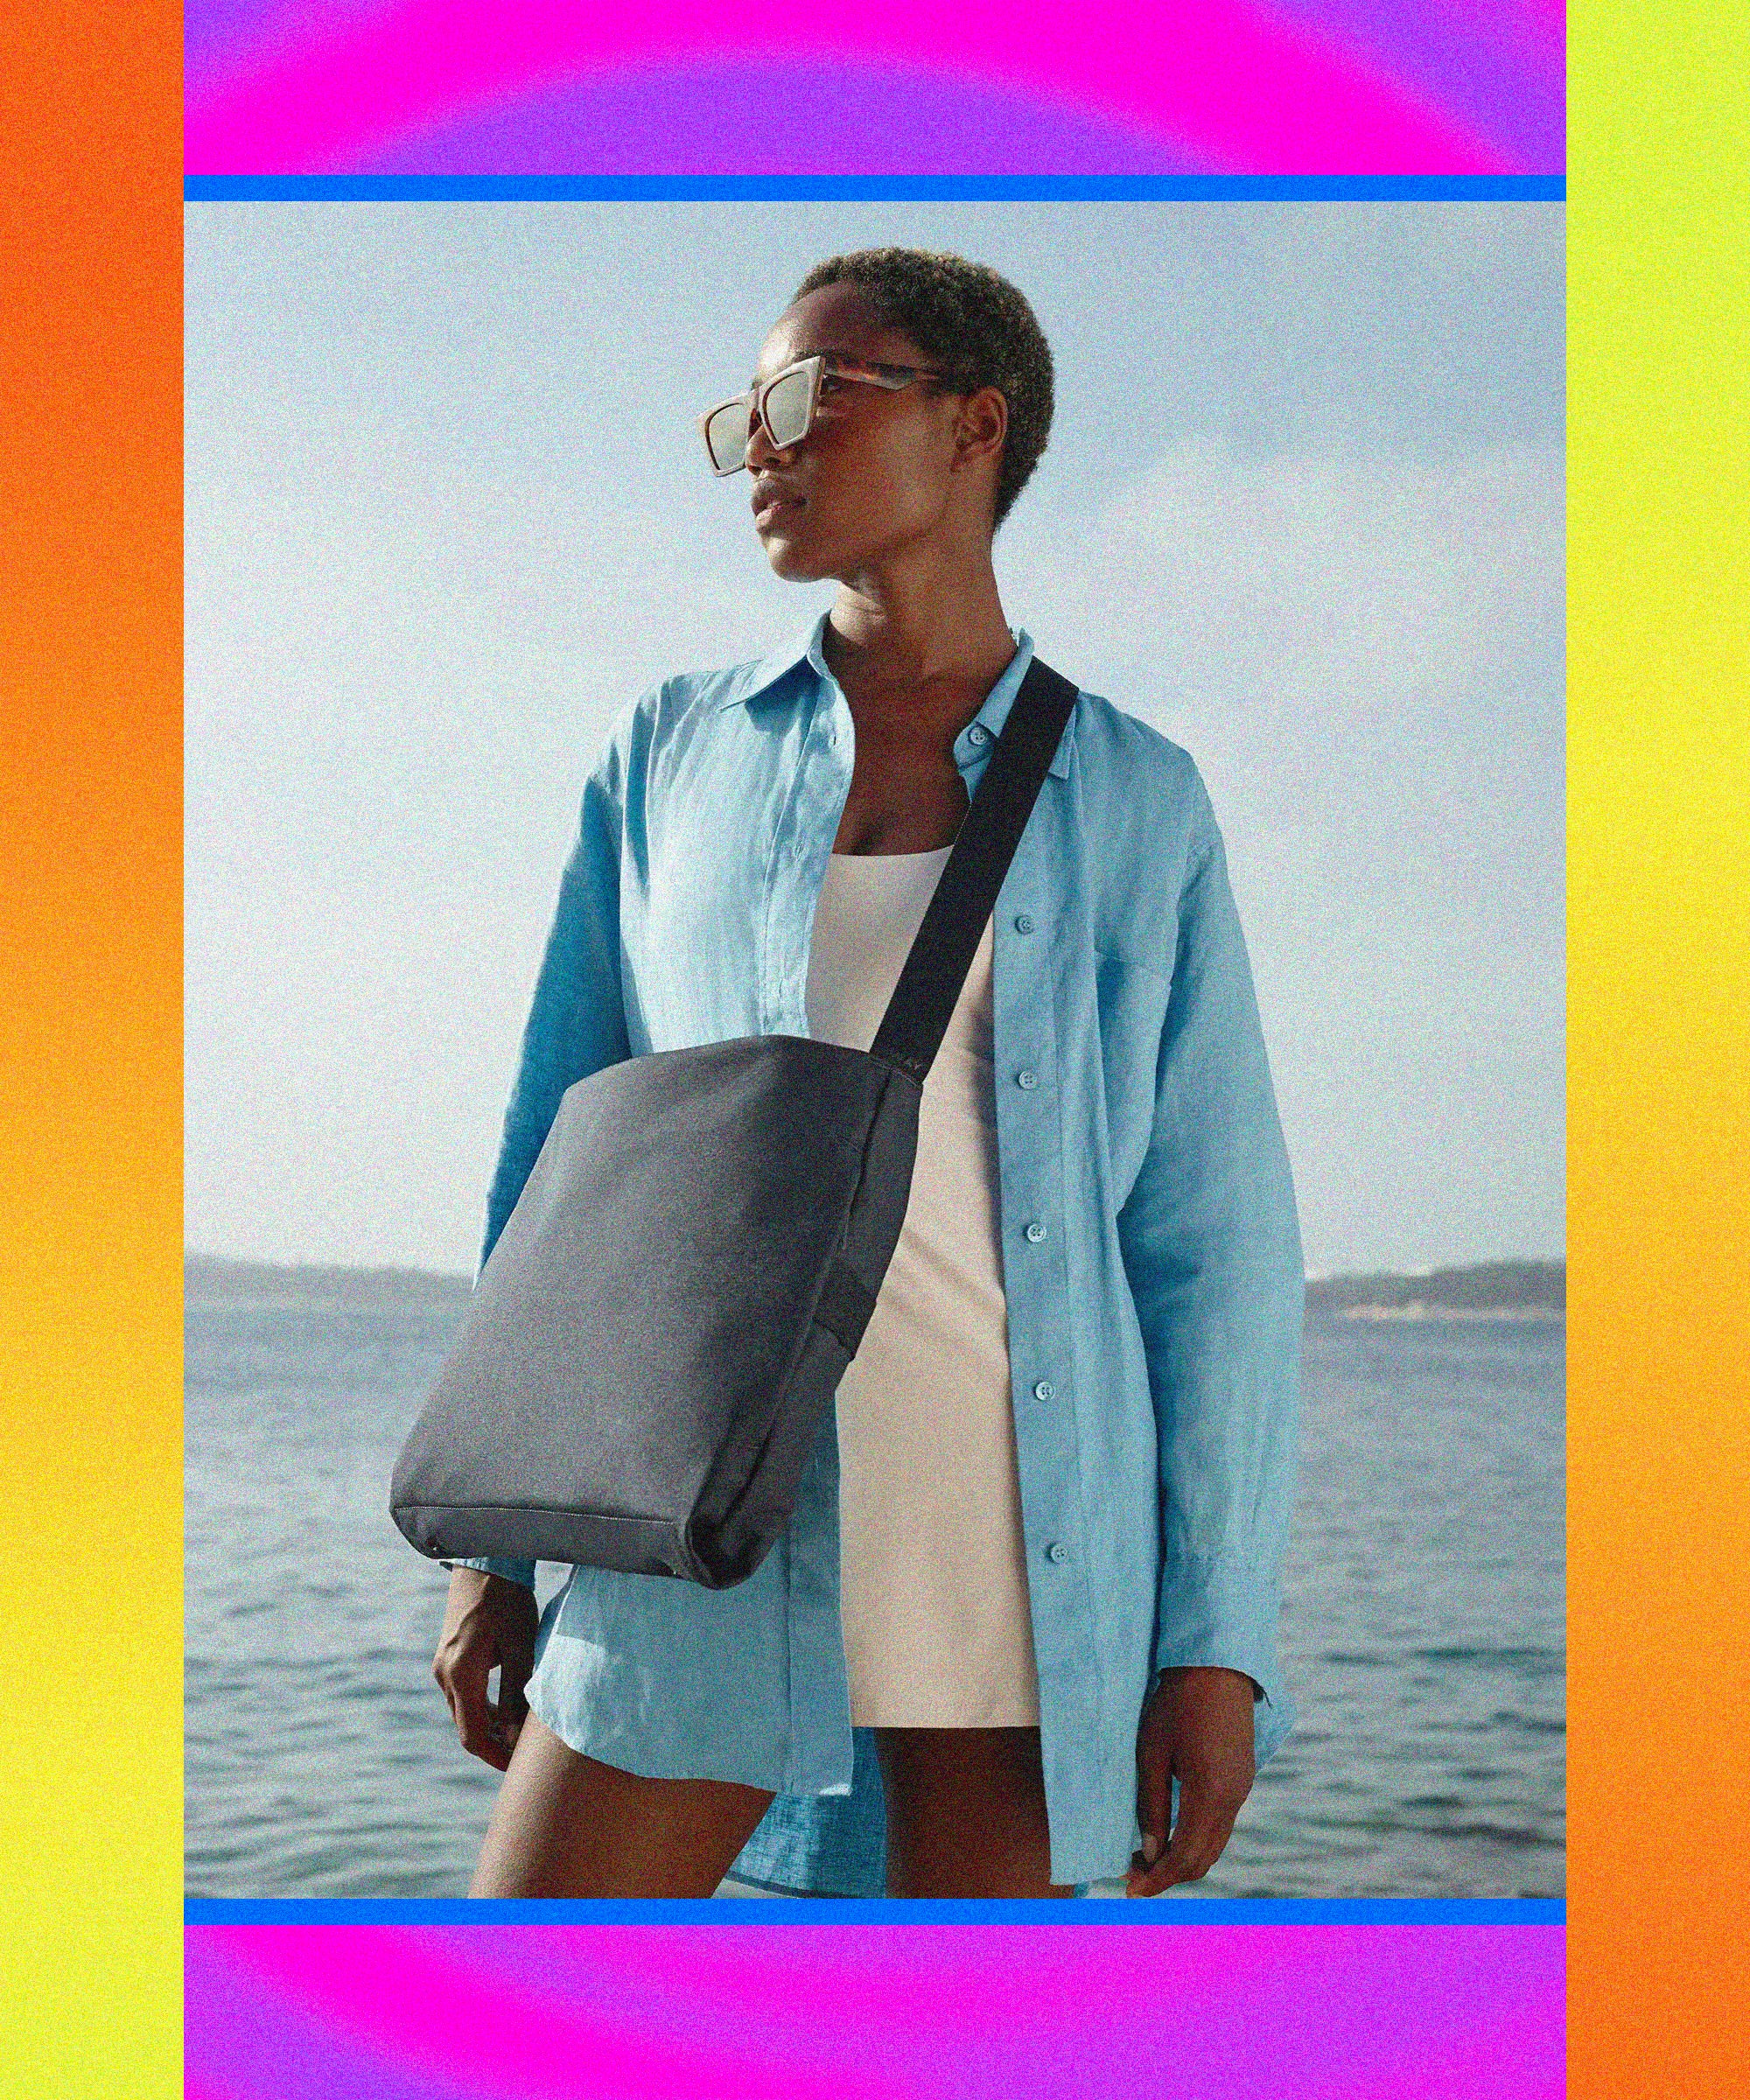 Stylish work bags for laptops, commuting and more - Good Morning America